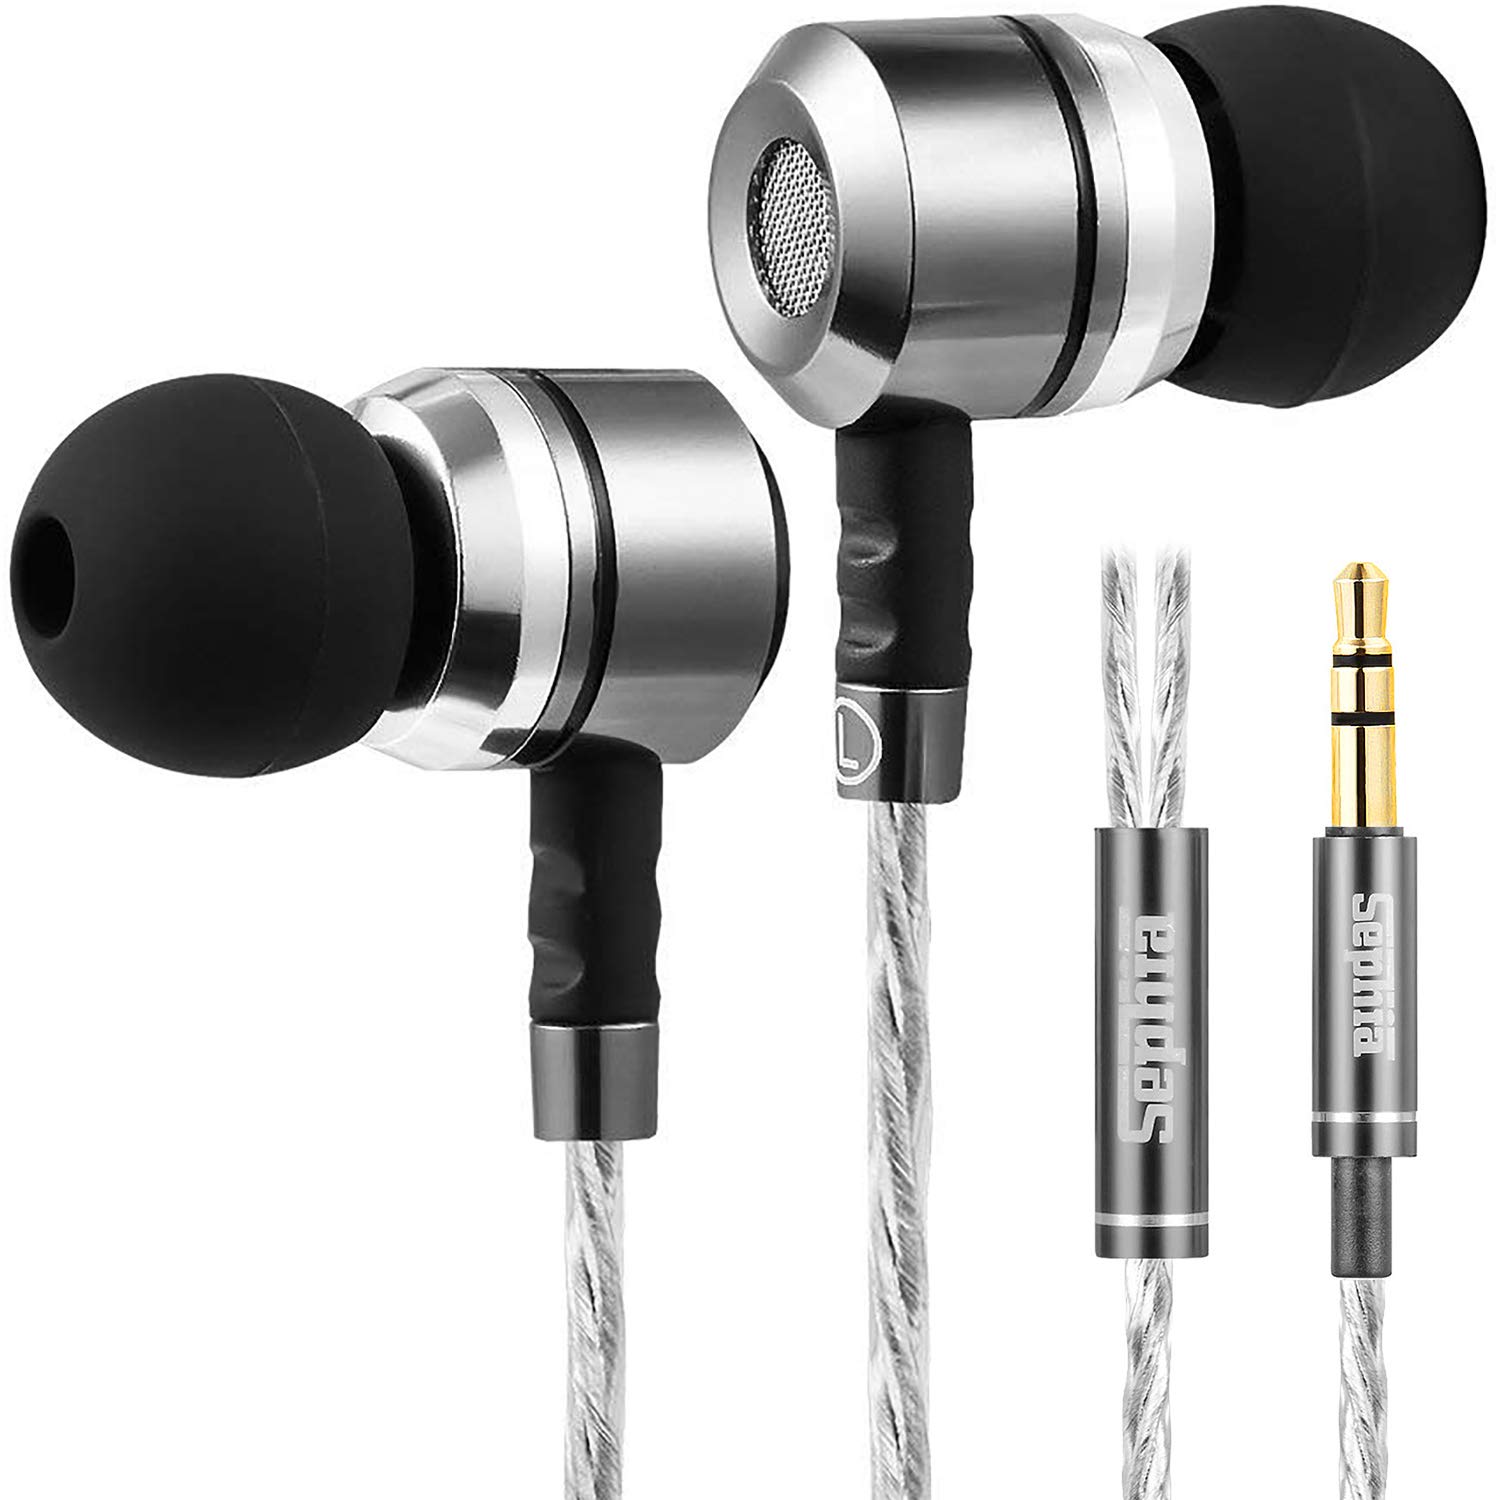 sephia SP3060 Earbuds Wired in Ear Headphones with Tangle-Free Cord Noise Isolating Earphones Deep Bass Case Ear Buds 3.5 mm Jack Plug